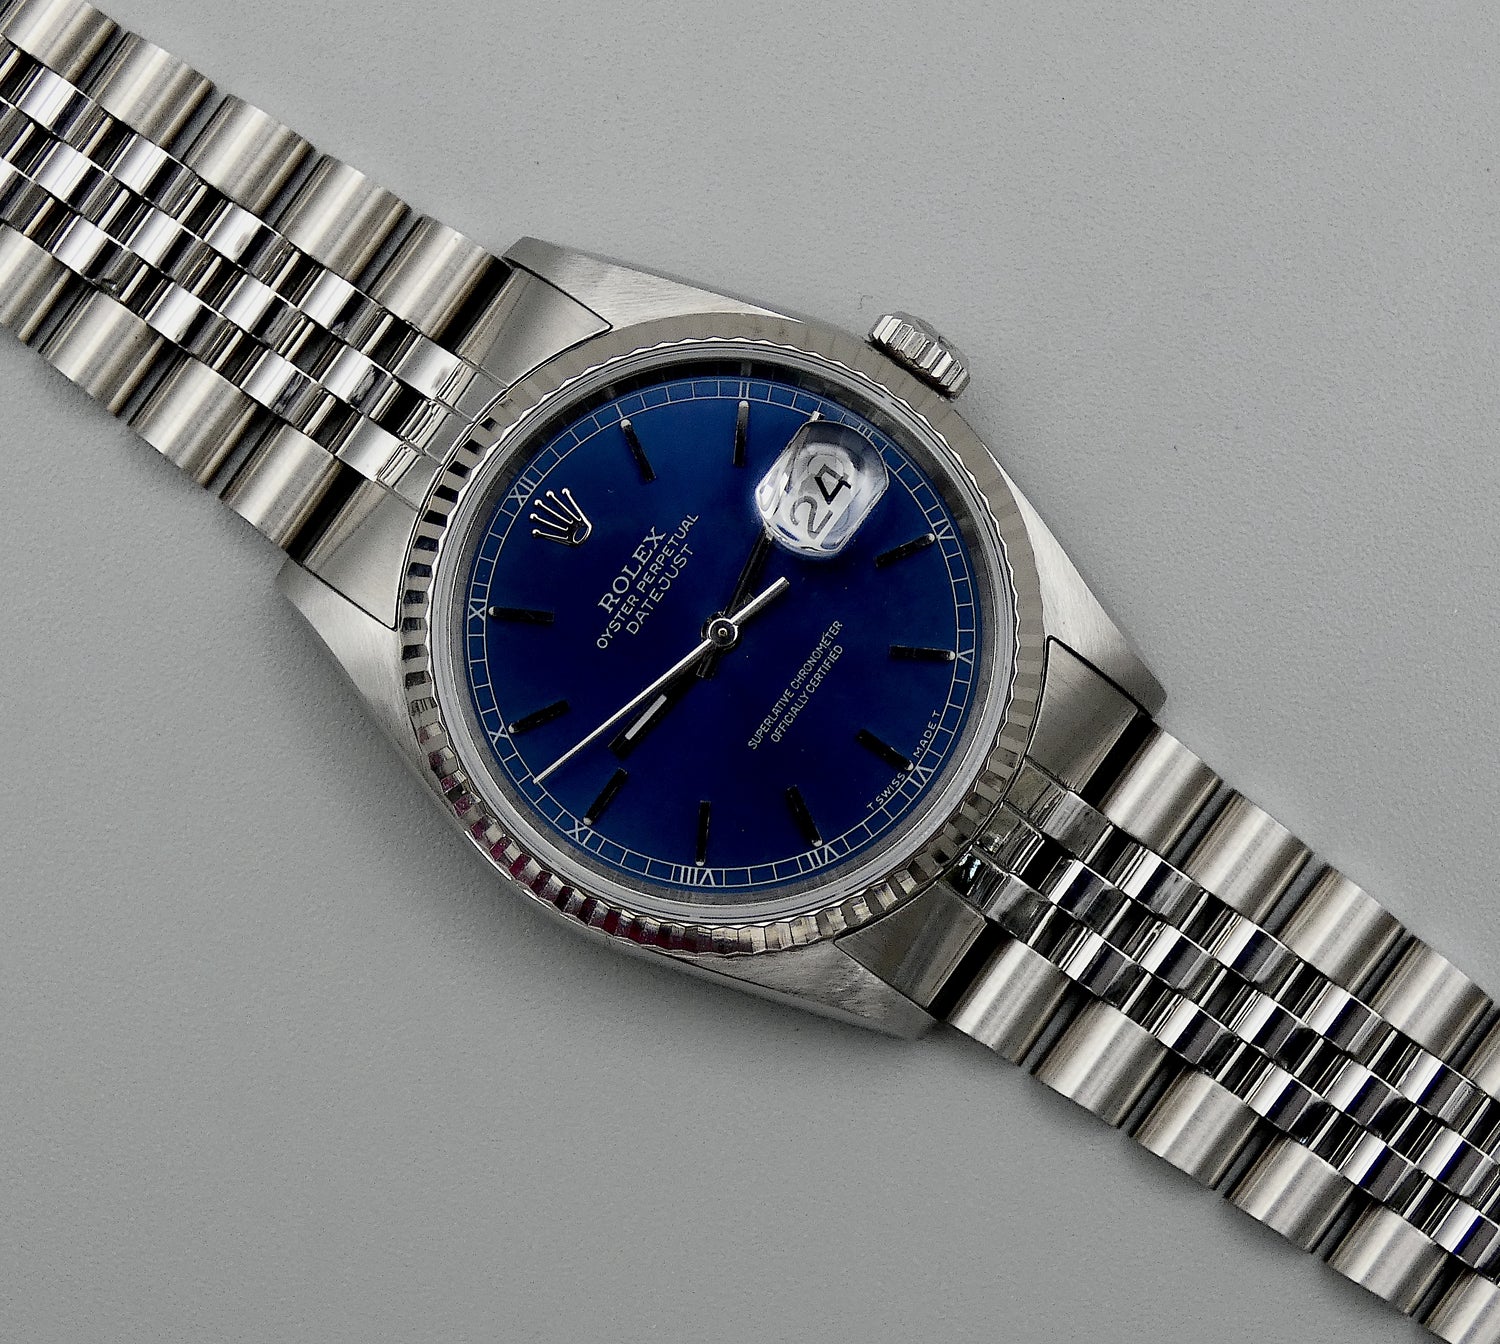 SOLD Datejust 36 Blue / MINT / serviced with warranty